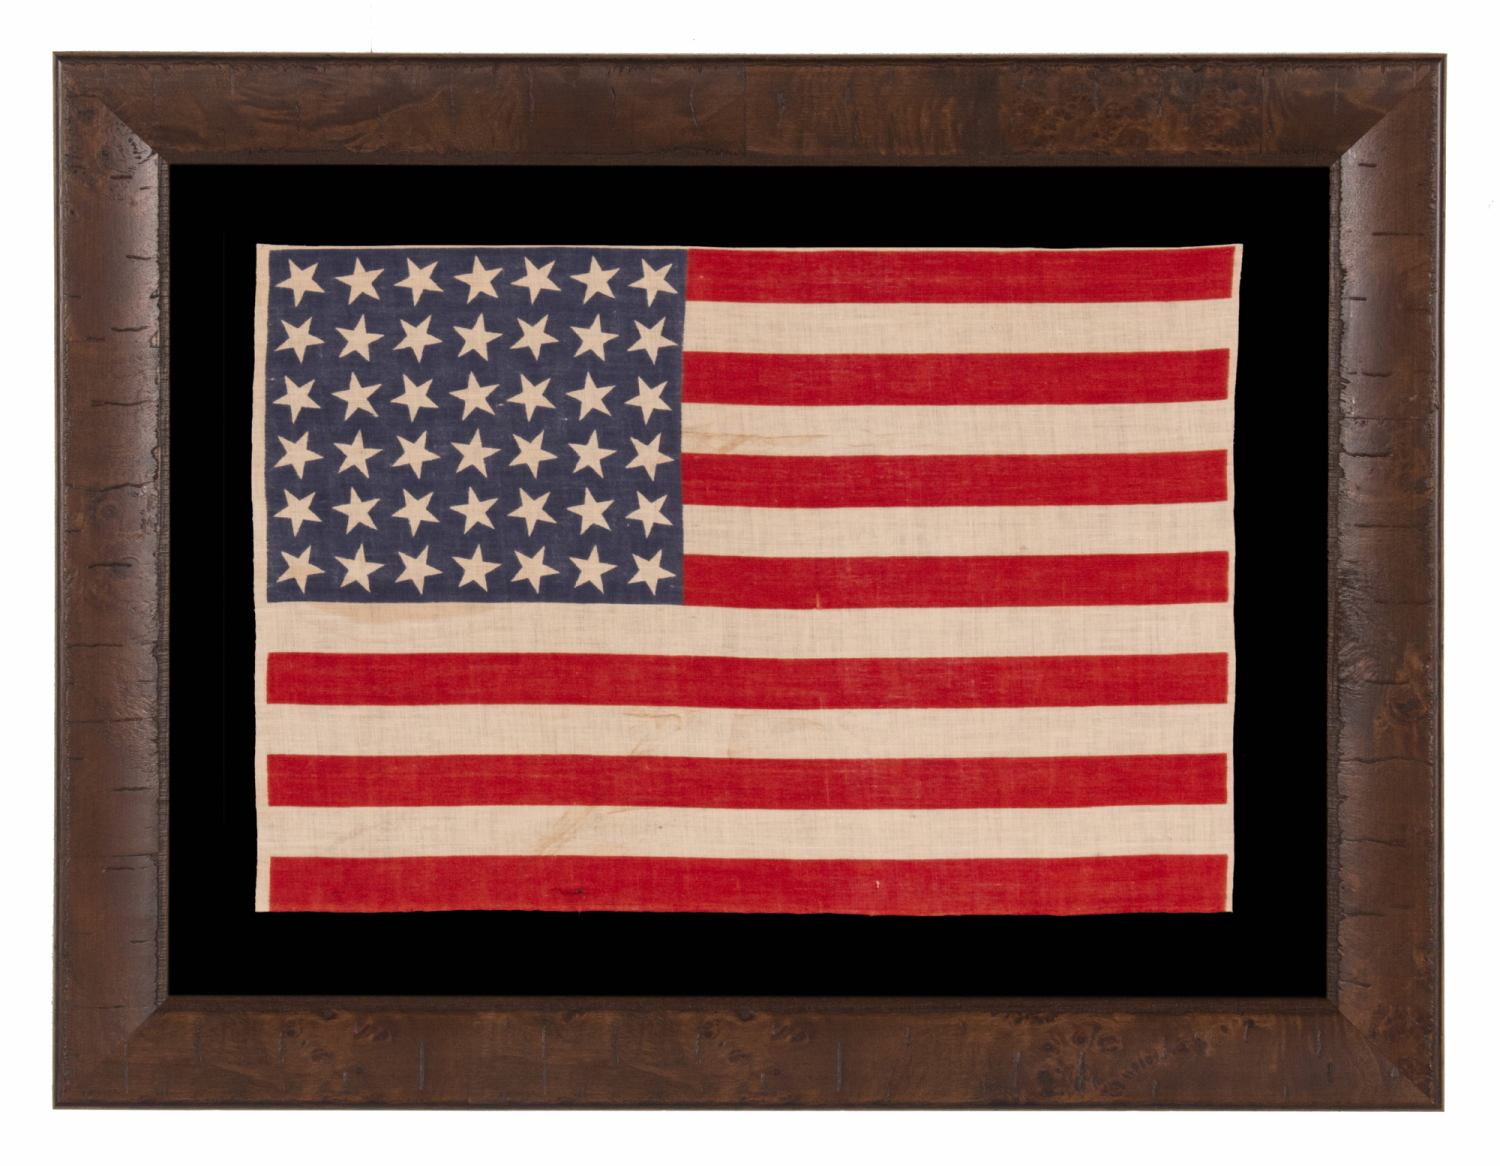 42 STARS ON AN ANTIQUE AMERICAN FLAG WITH SCATTERED STAR POSITIONING, REFLECTS THE ADDITION OF WASHINGTON STATE, MONTANA, AND THE DAKOTAS, NEVER AN OFFICIAL STAR COUNT, circa 1889-1890